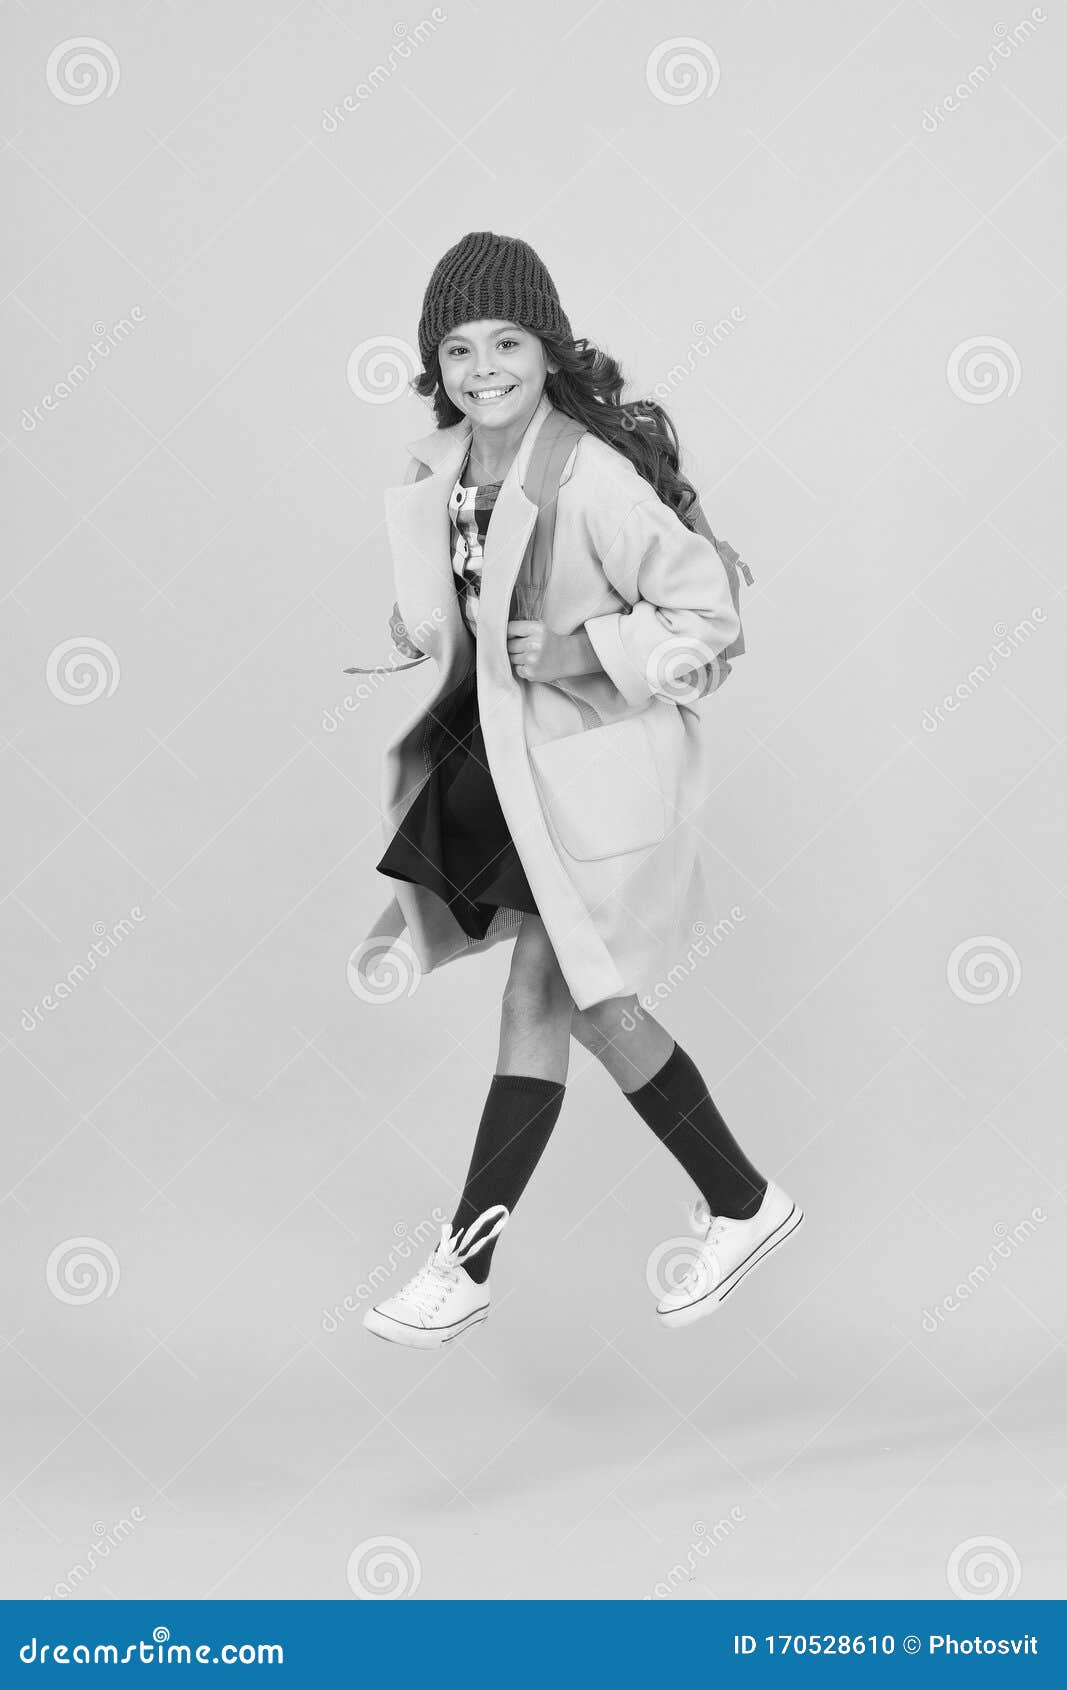 cool schoolgirl. have fun charismatic girl on yellow background. madcap concept. teen age. girl adorable stylish modern